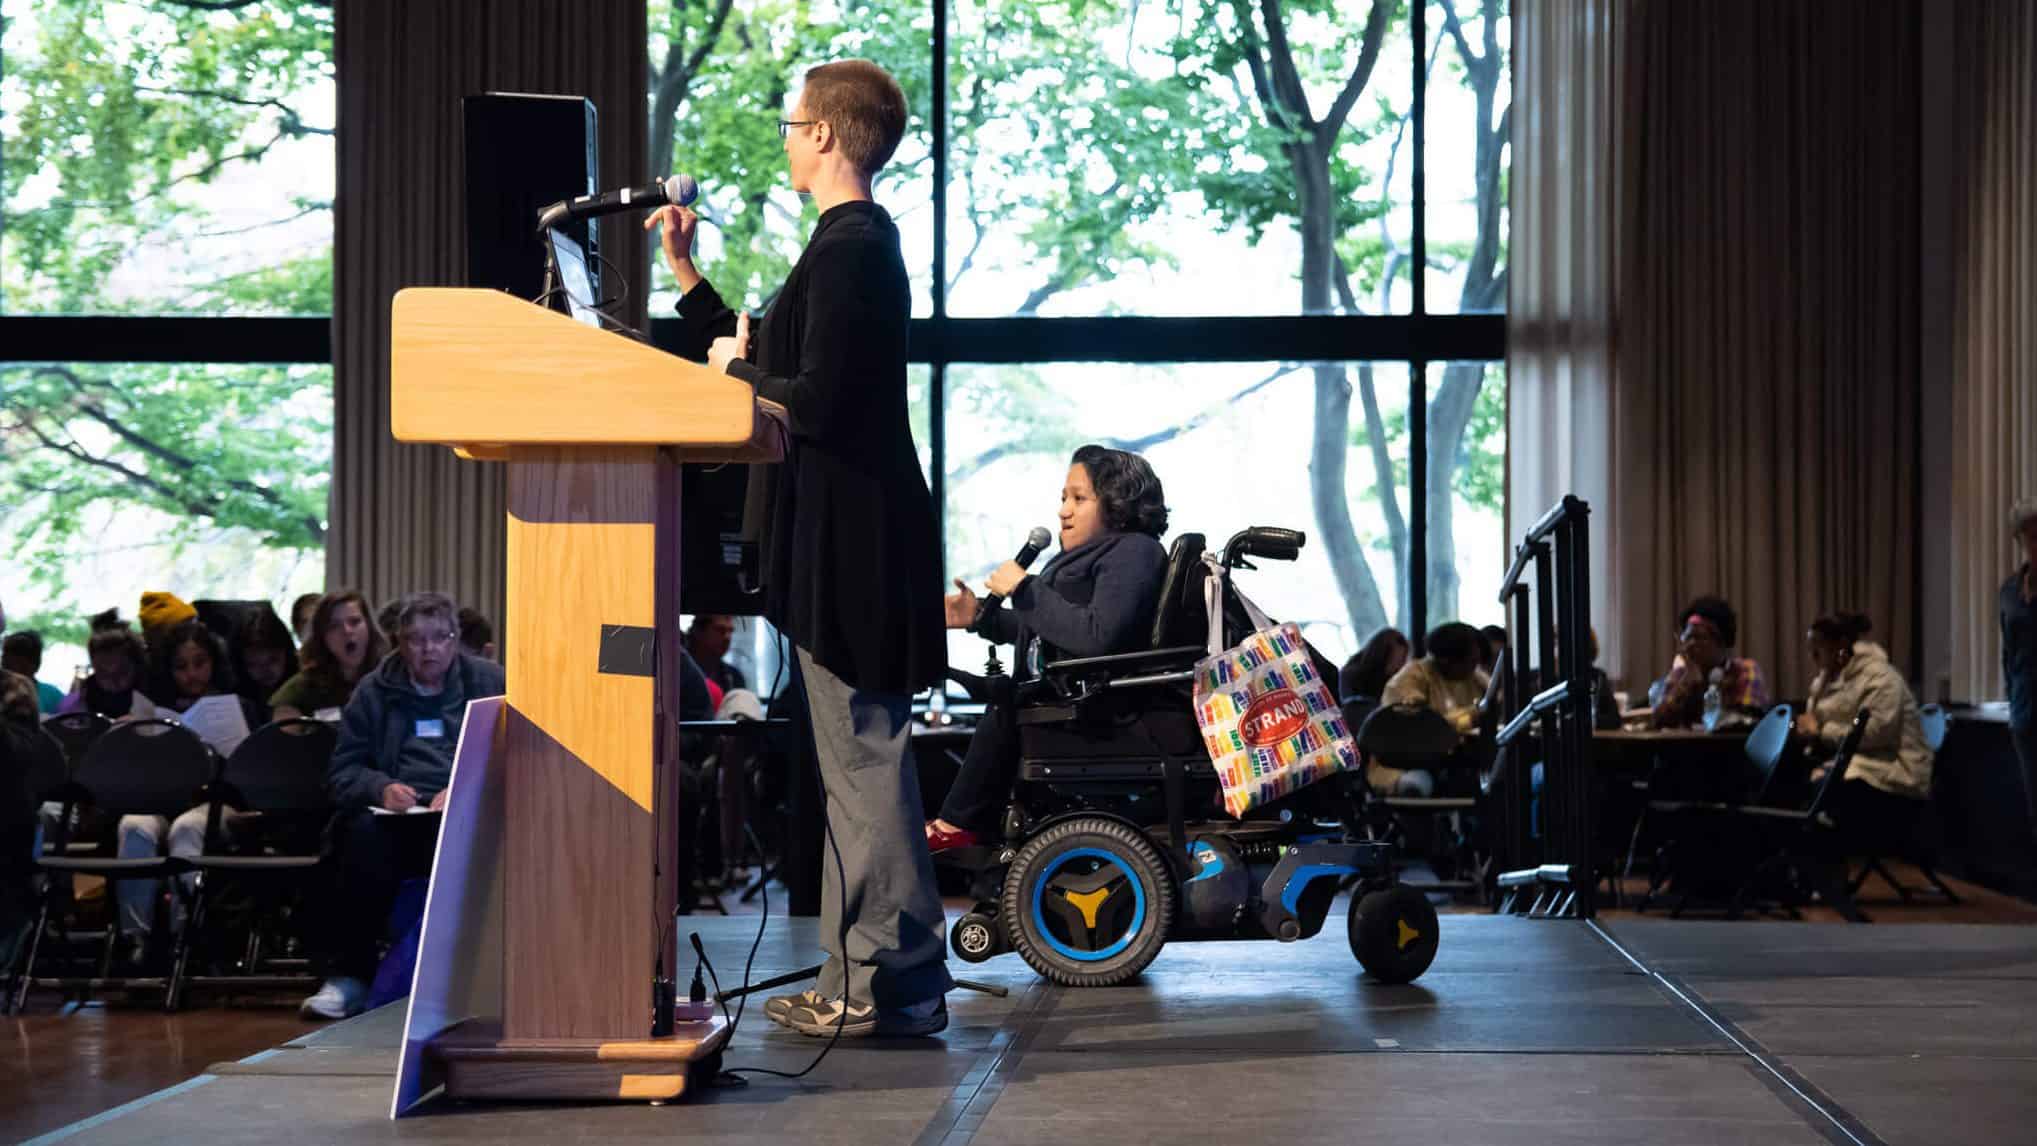 Sandy Ho sits in her power chair and speaks into a microphone, next to another speaker on a stage in front of an audience.